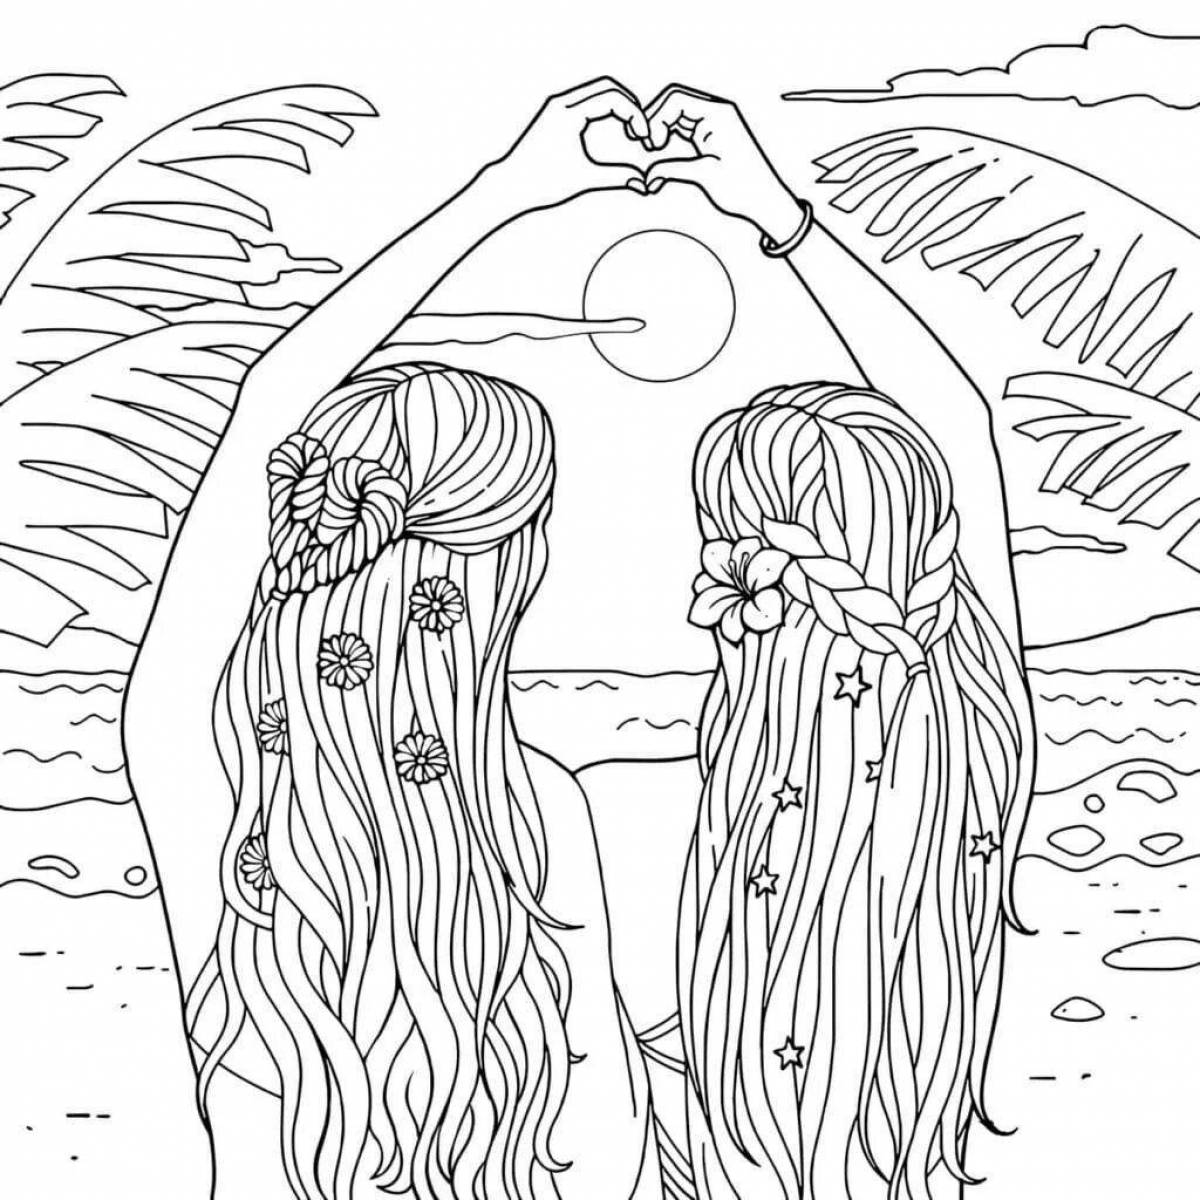 Coloring page charming beautician girl